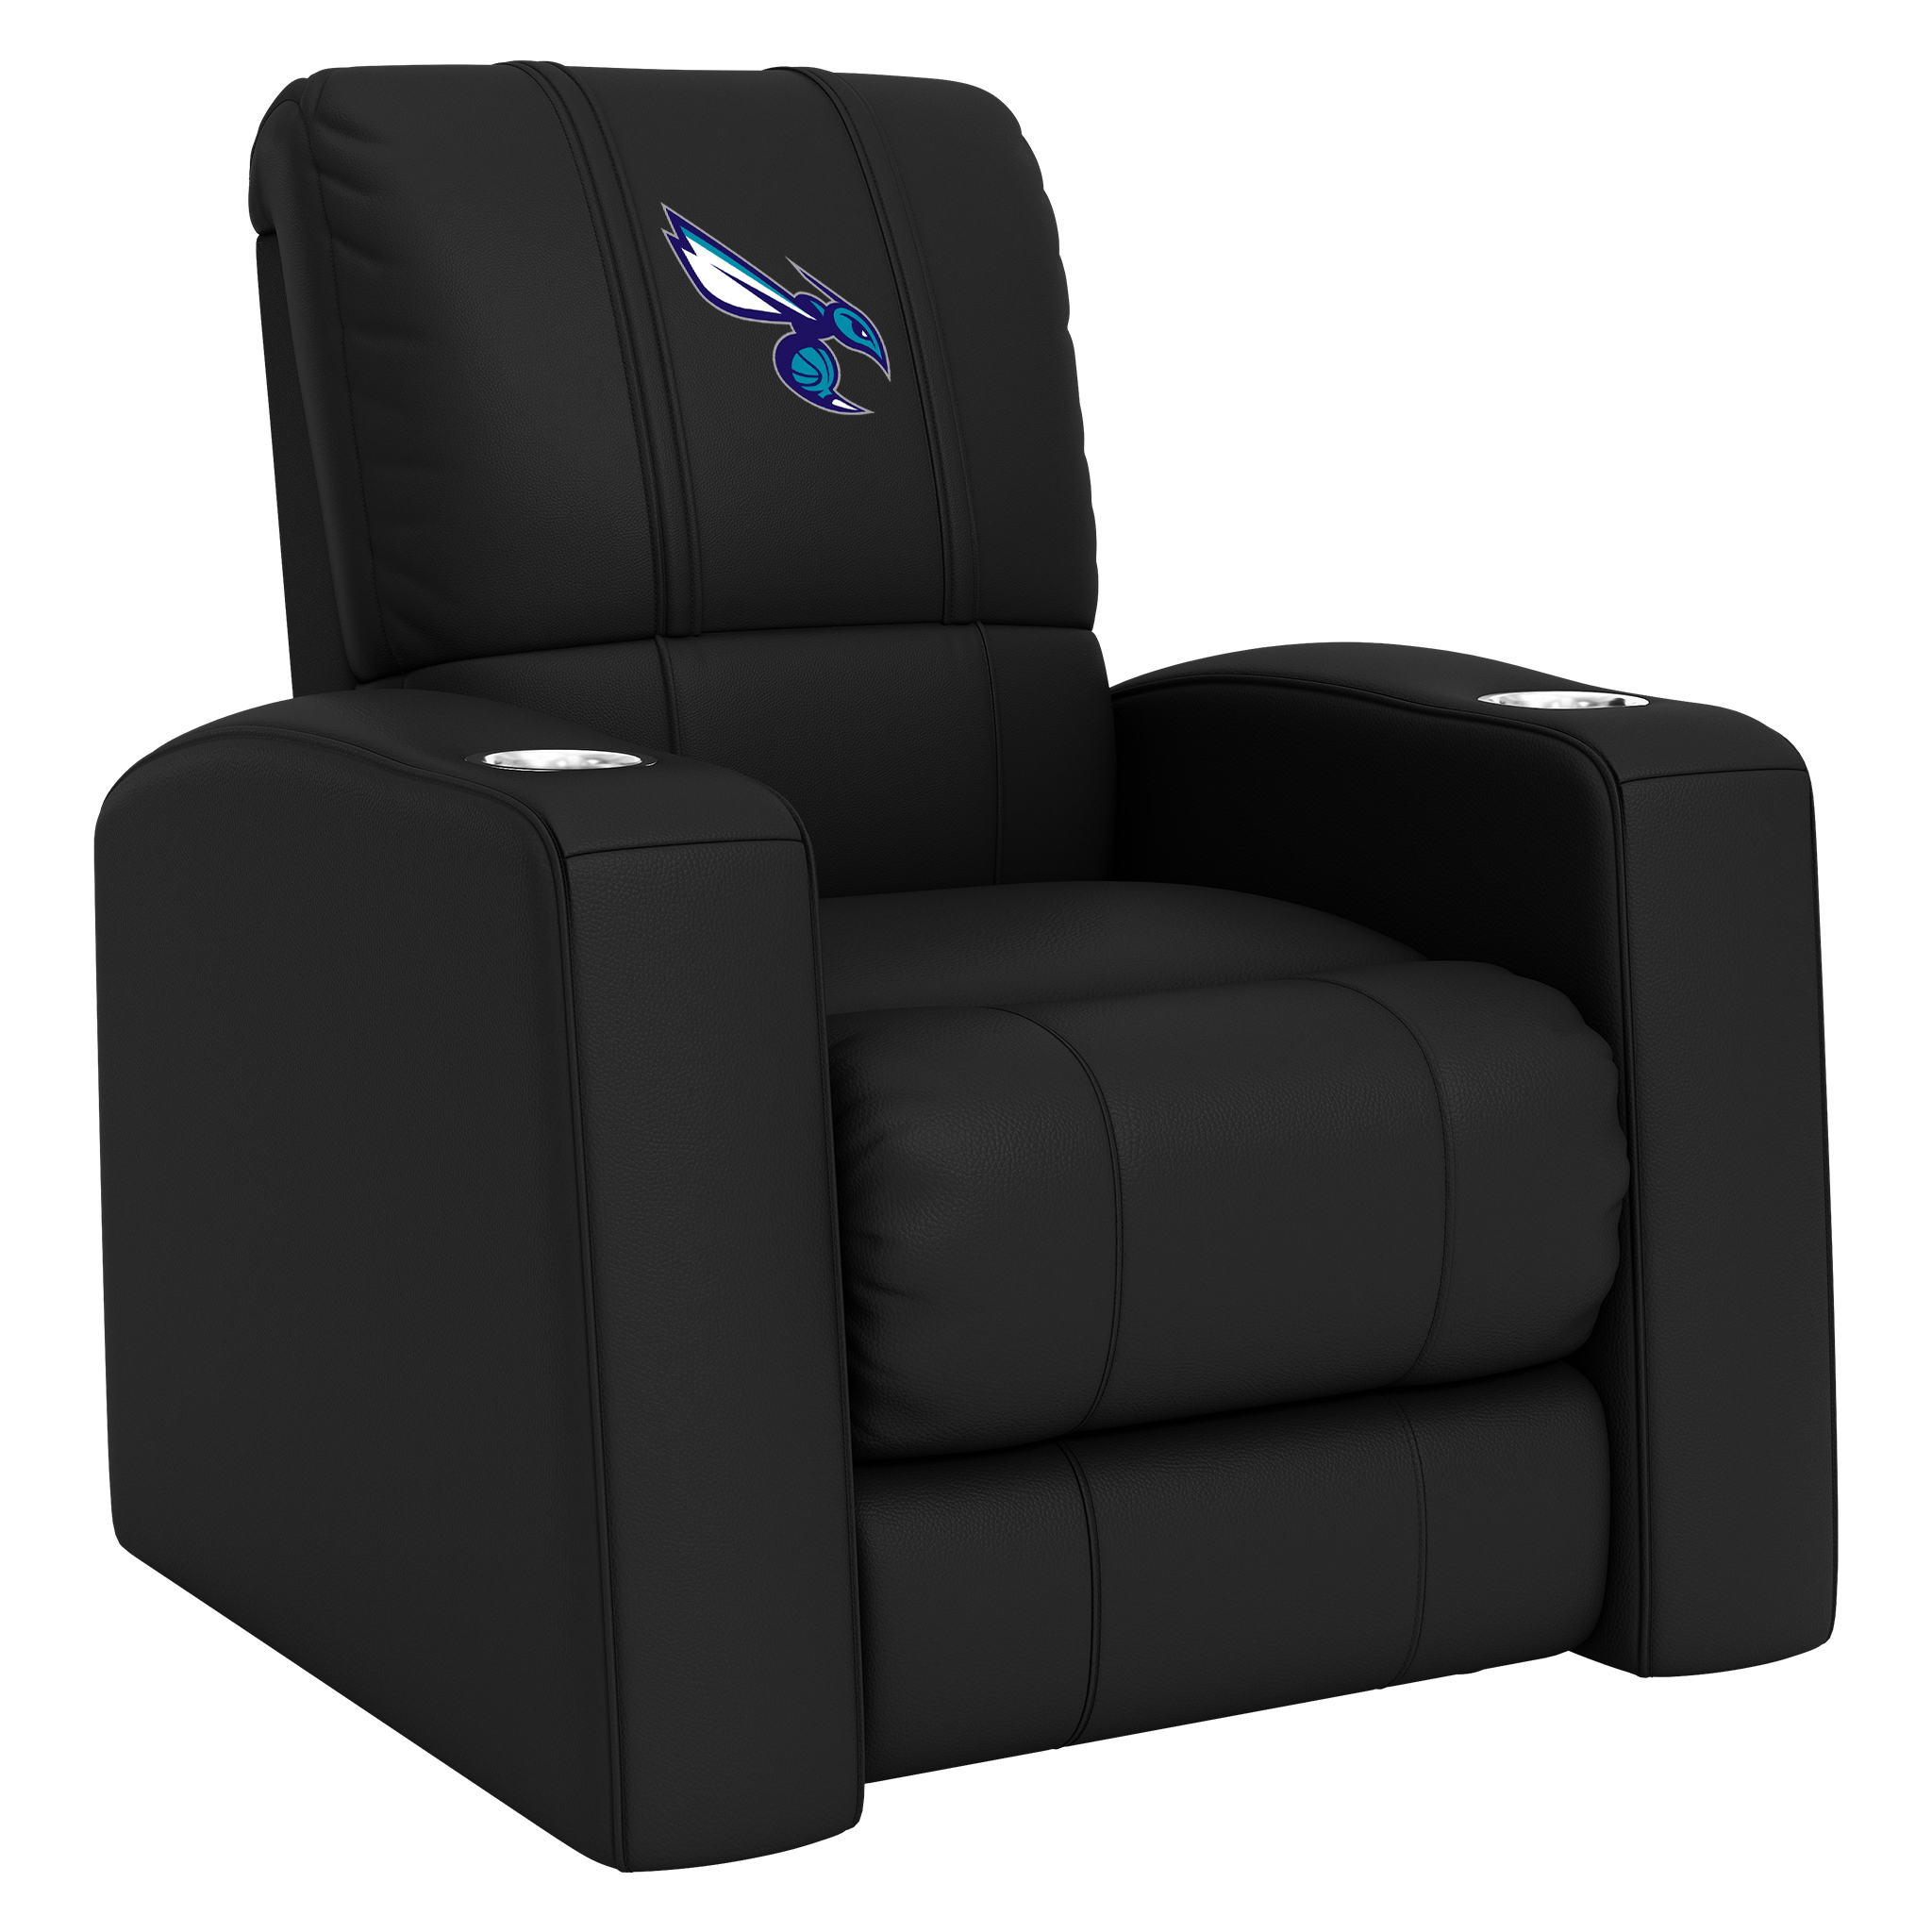 Charlotte Hornets Home Theater Recliner with Charlotte Hornets Secondary